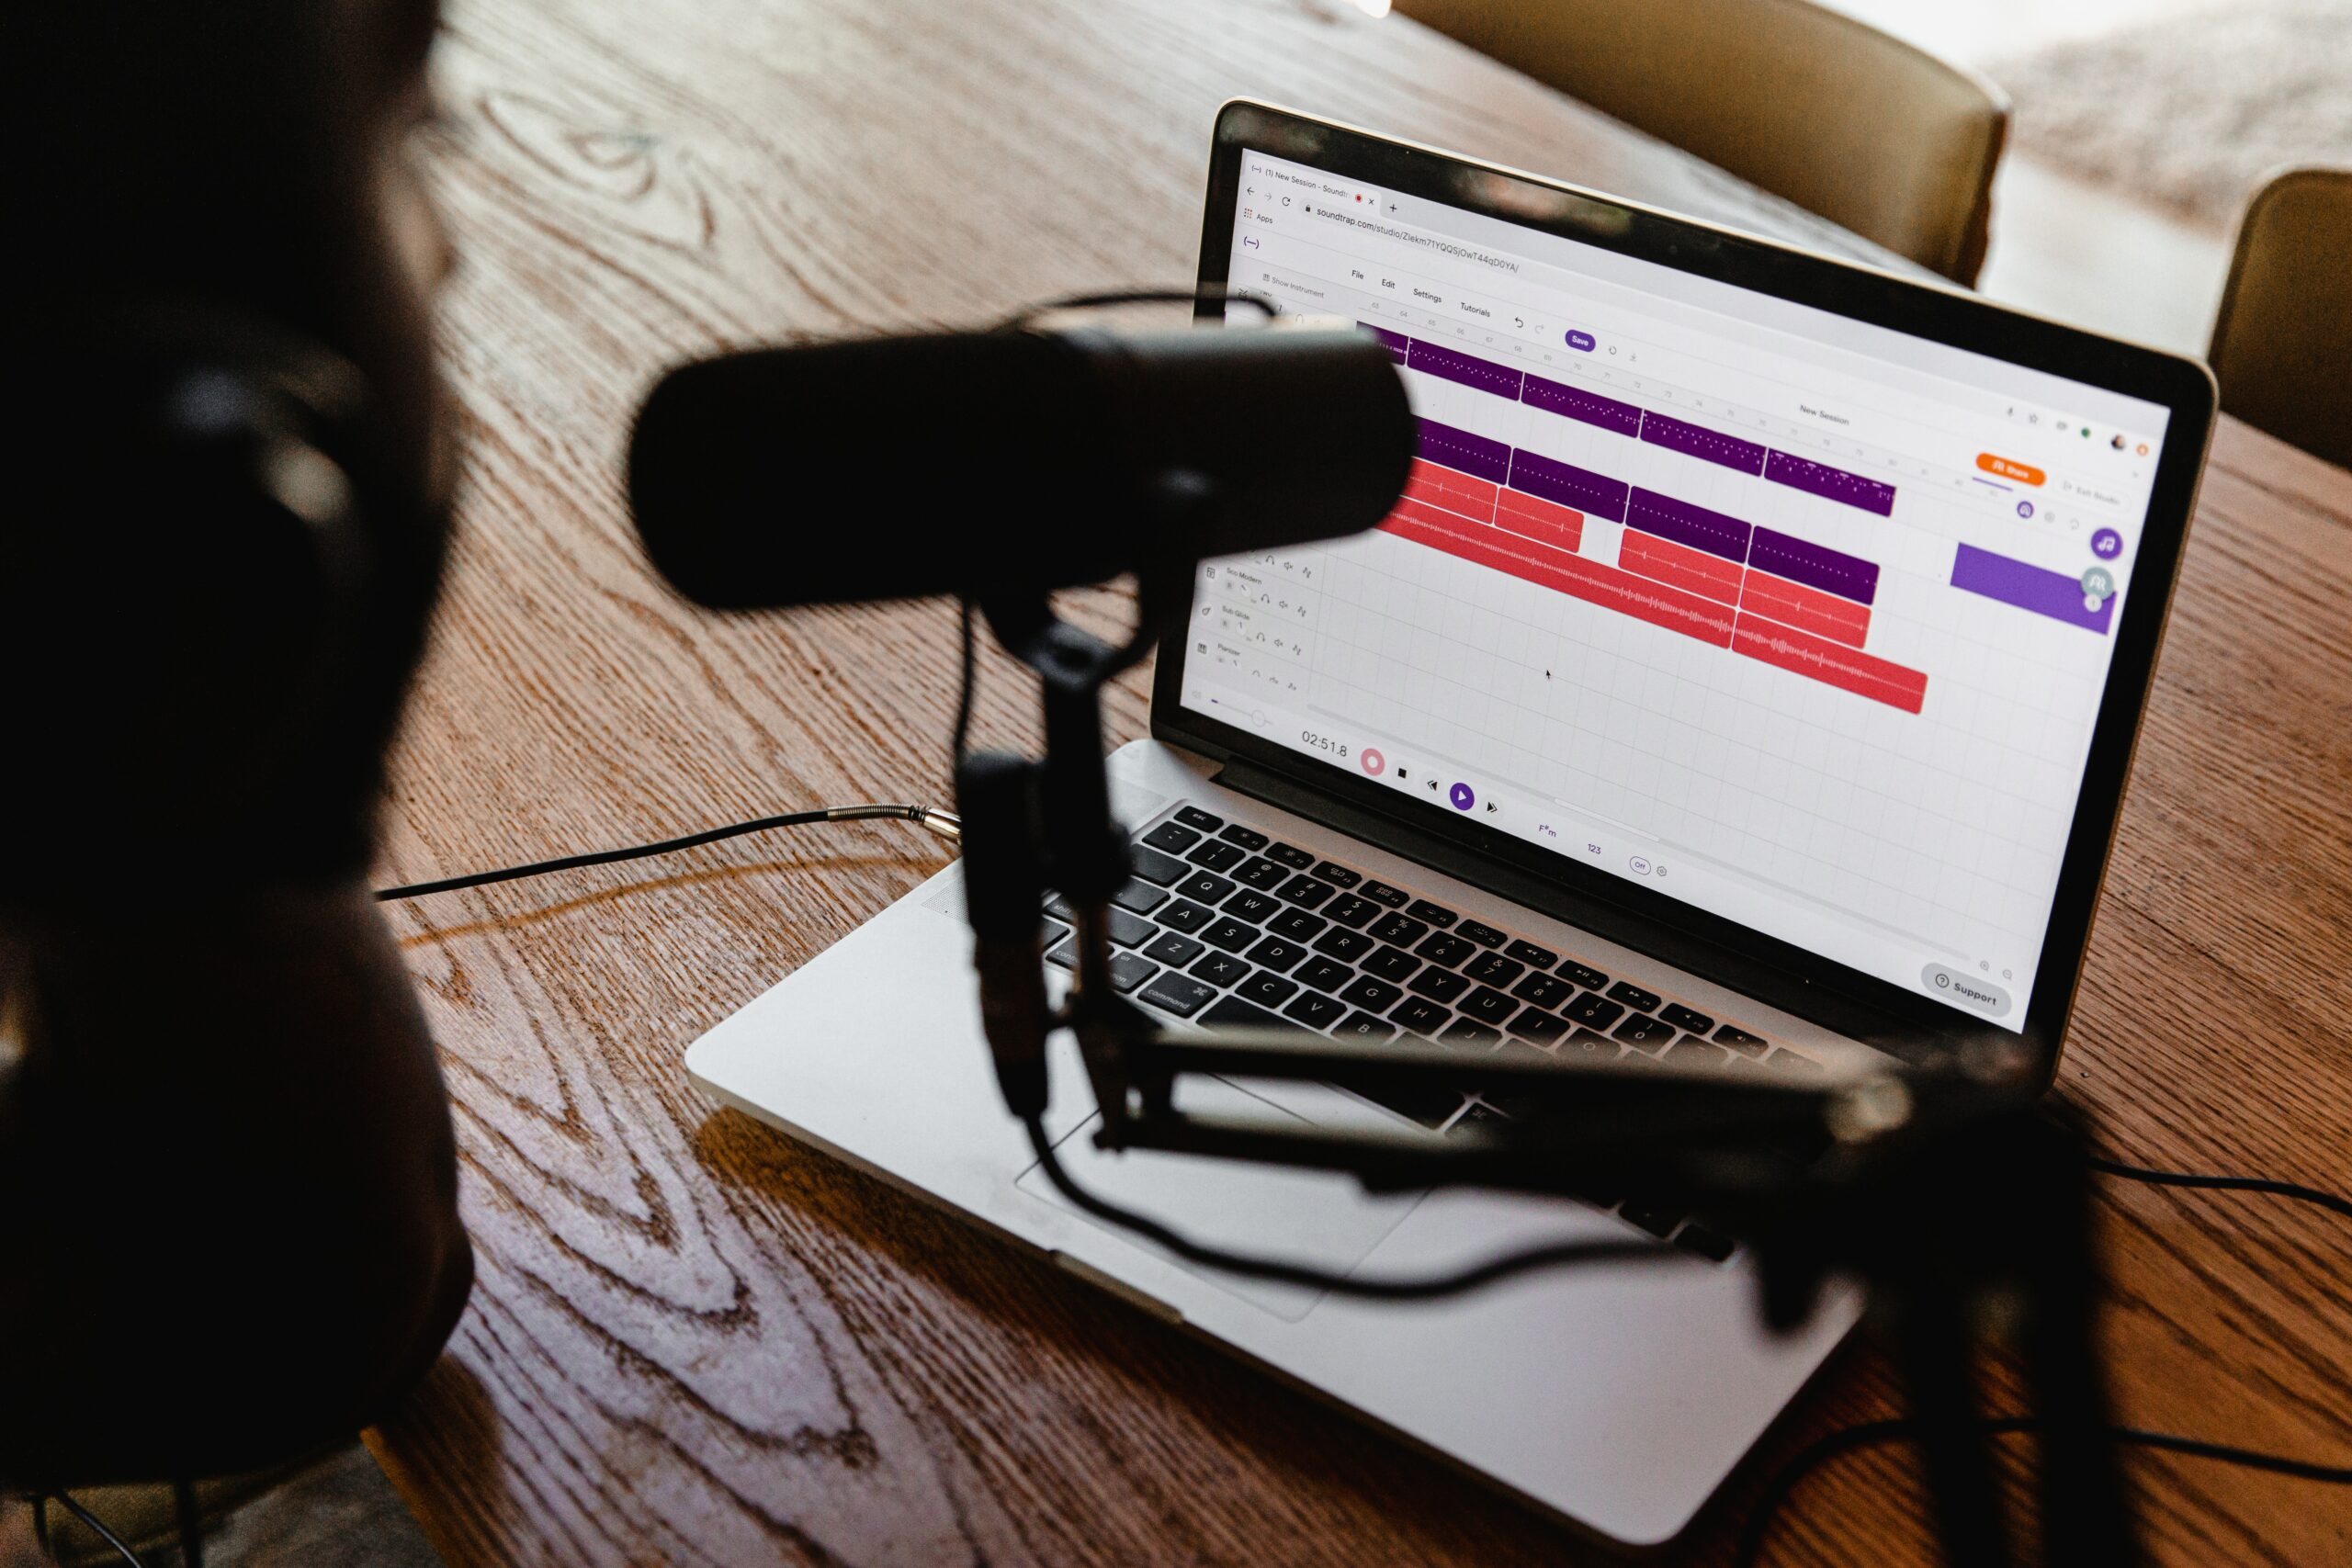 Image of a laptop and microphone.